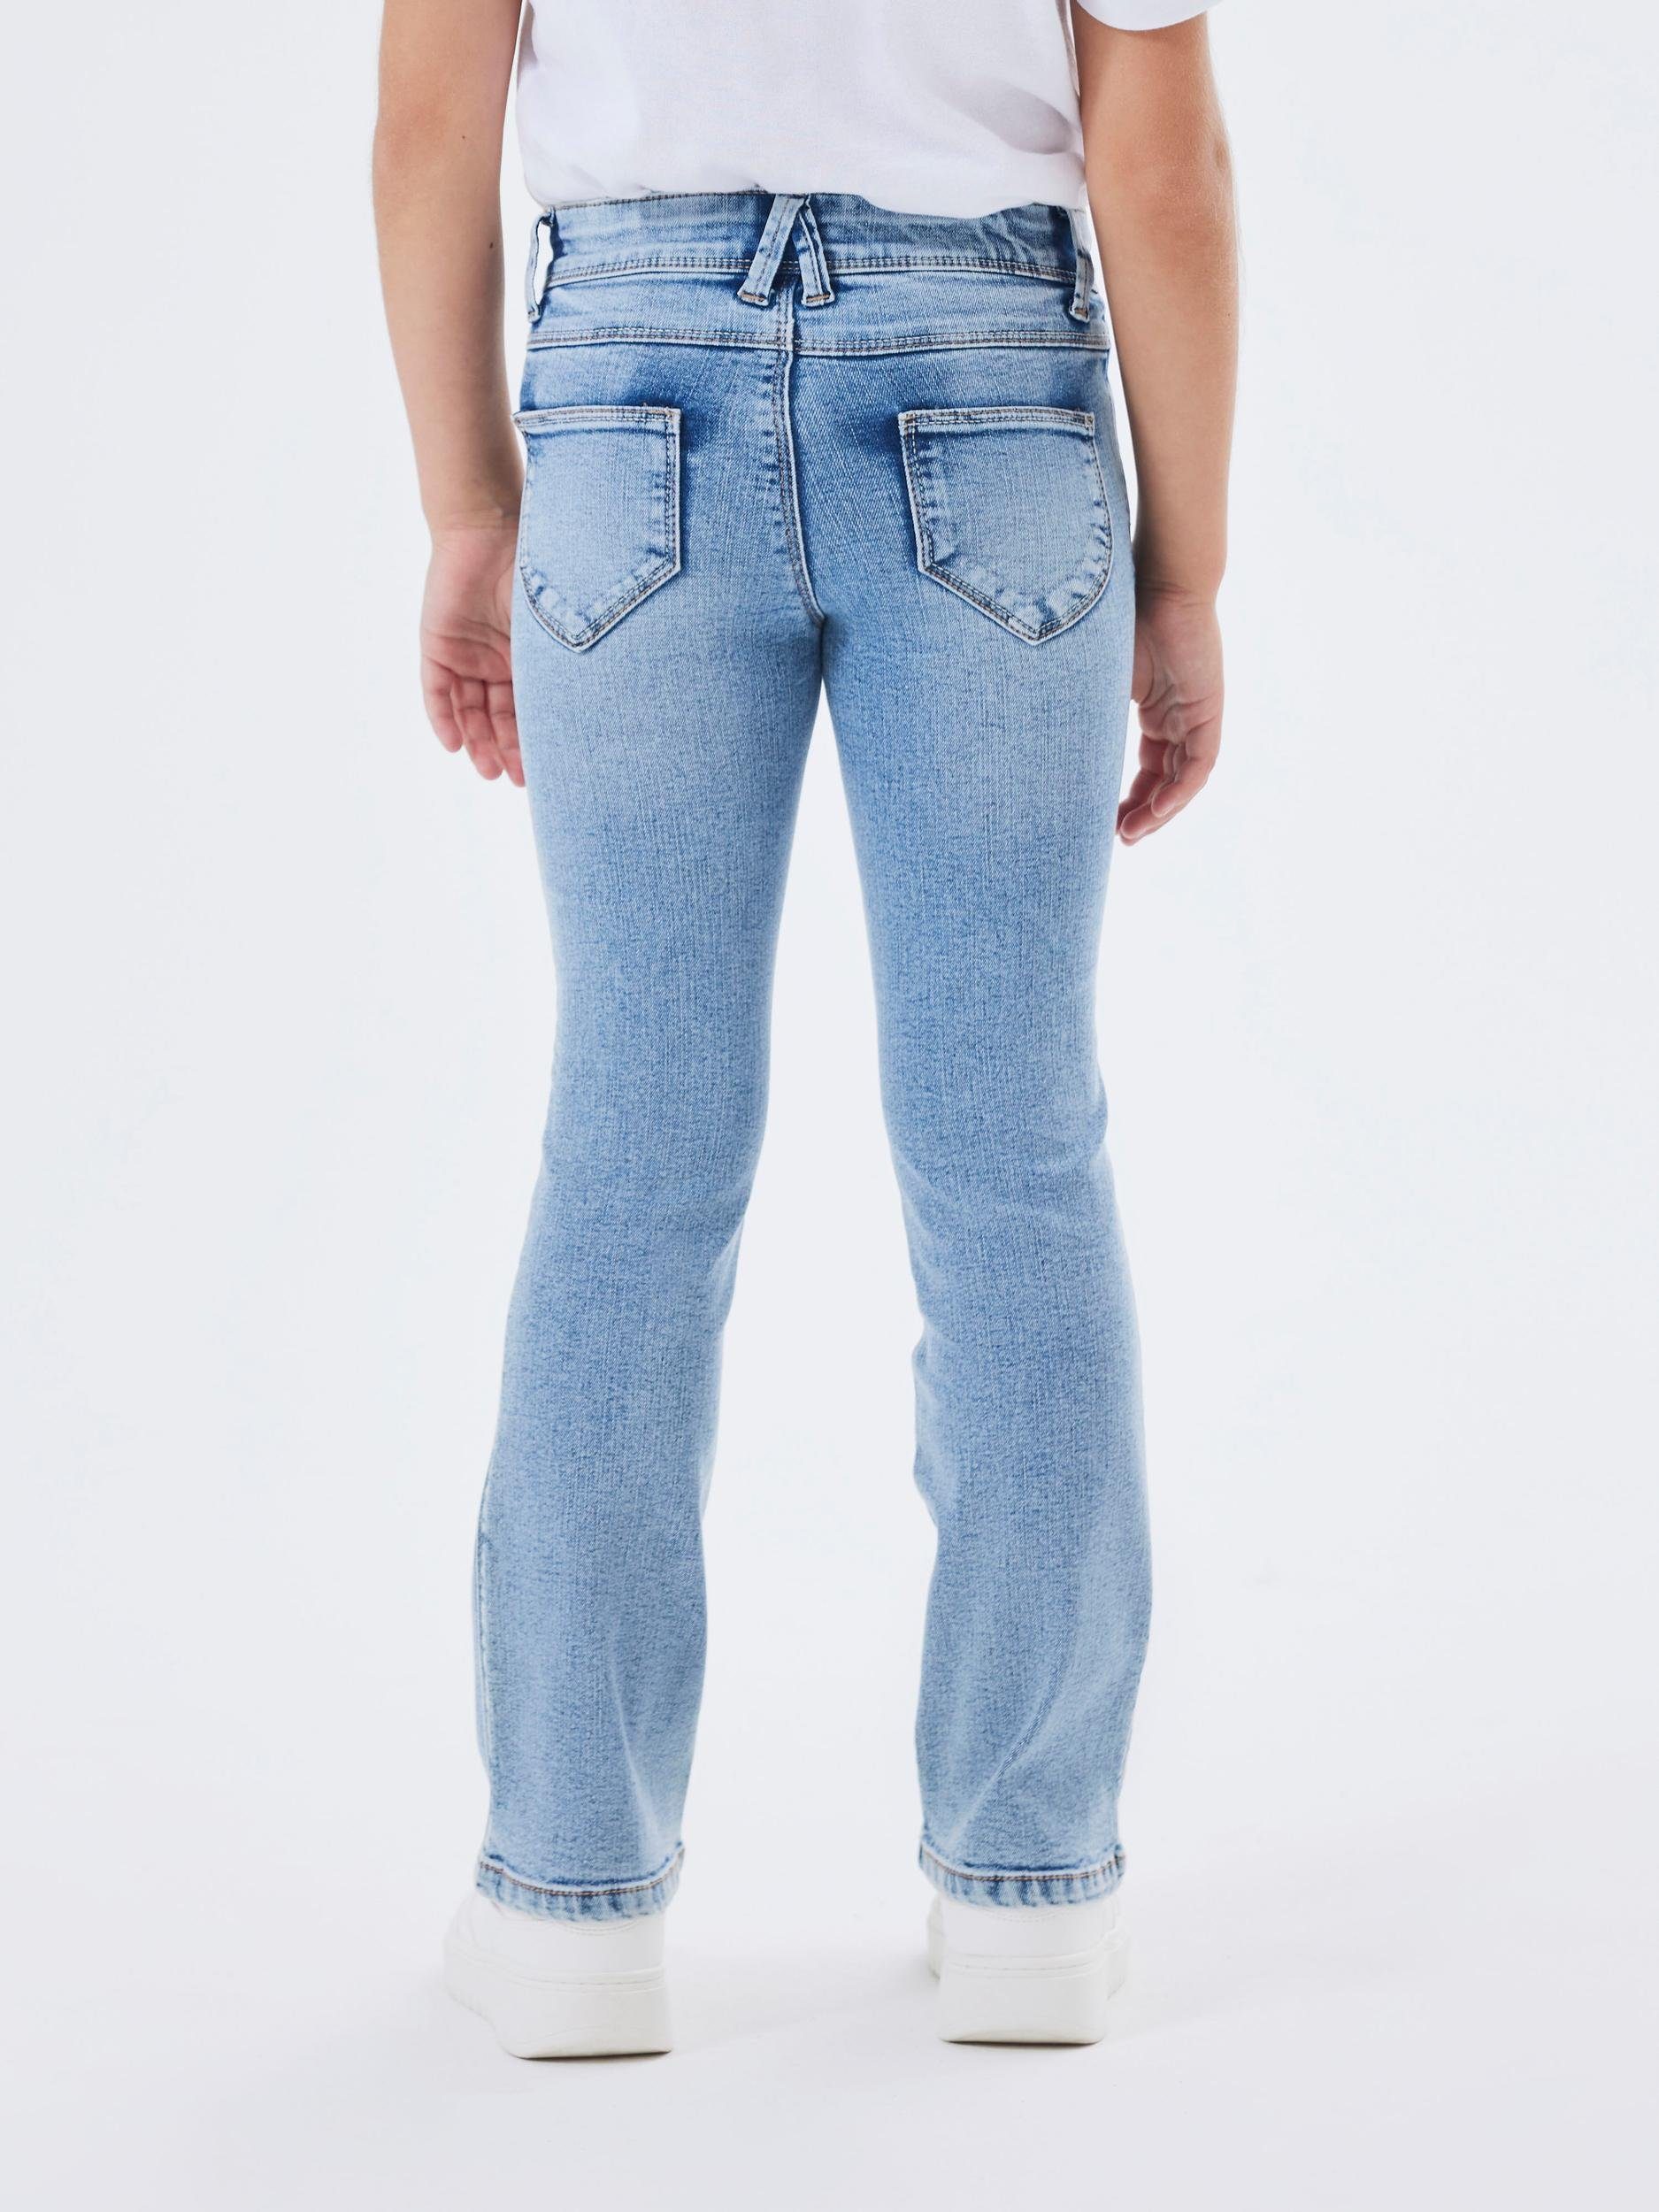 SKINNY Name NKFPOLLY JEANS mit Blue It 1142-AU NOOS Denim Stretch BOOT Light Bootcut-Jeans